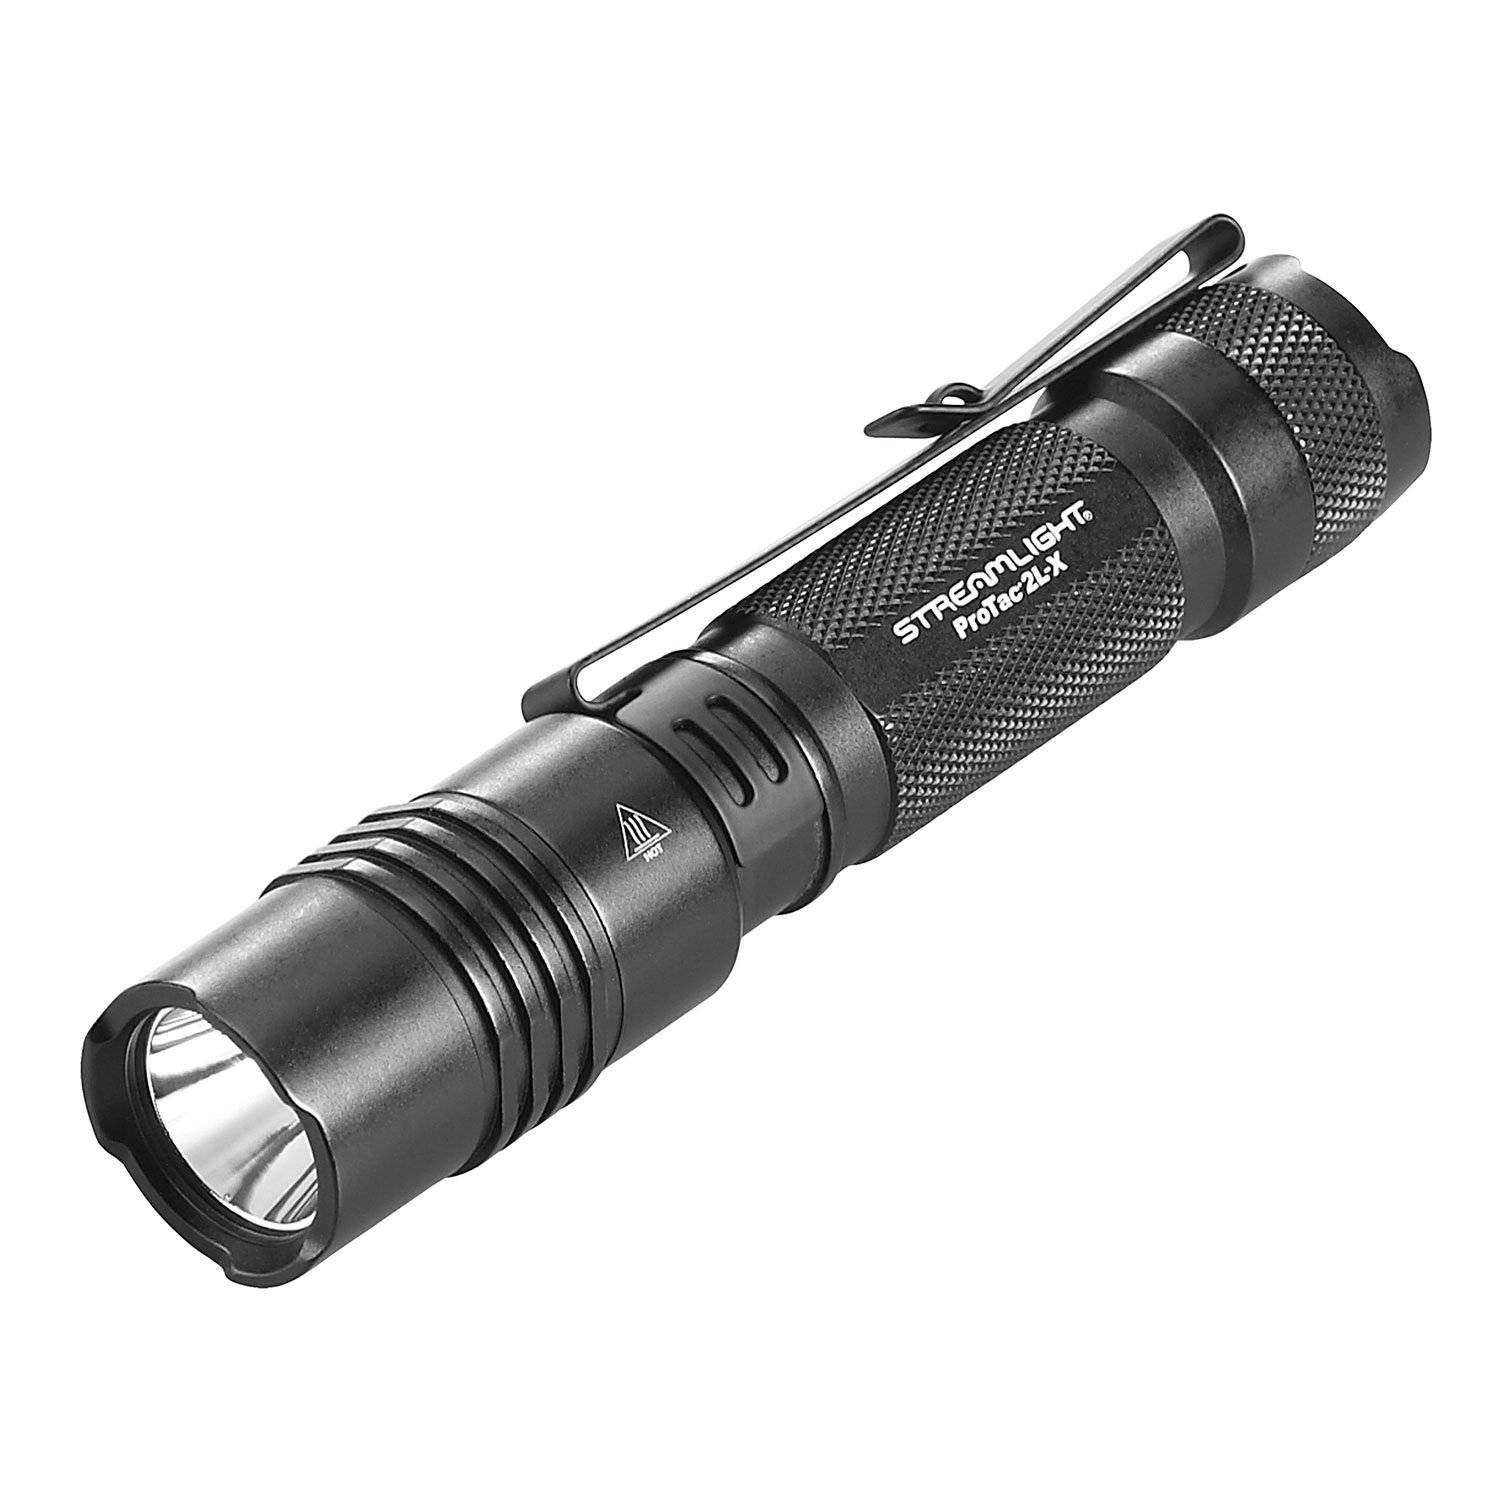 Streamlight ProTac 2L-X Light with USB Rechargeable Battery